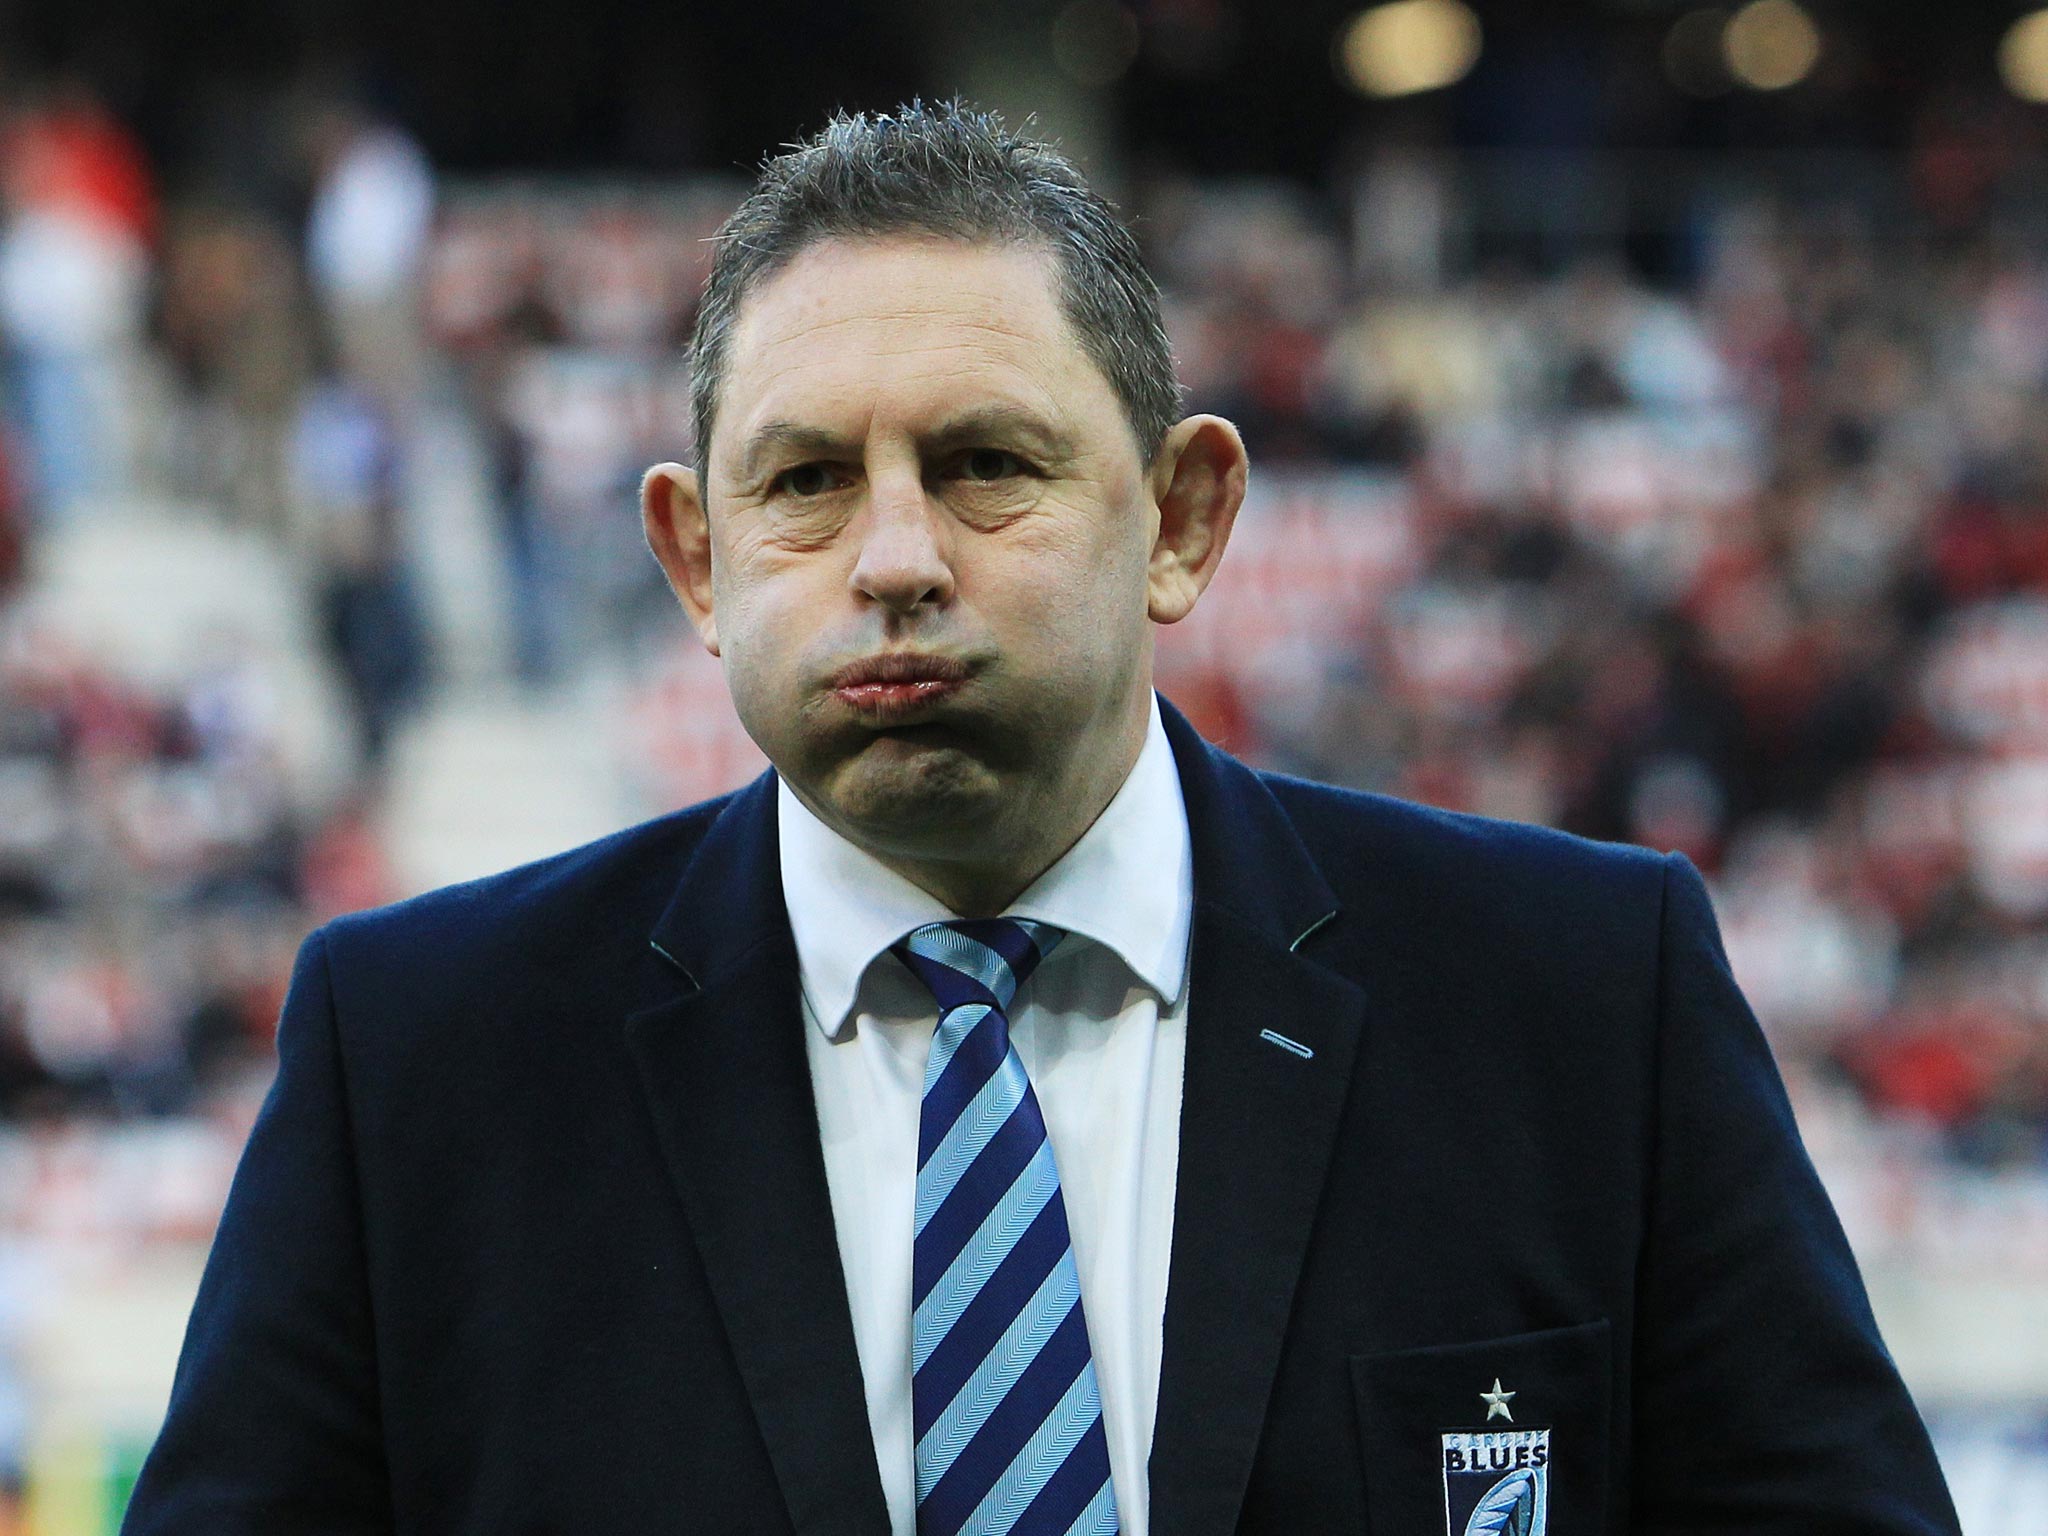 Phil Davies resigned with immediate effect from Cardiff Blues following the defeat to Zebre